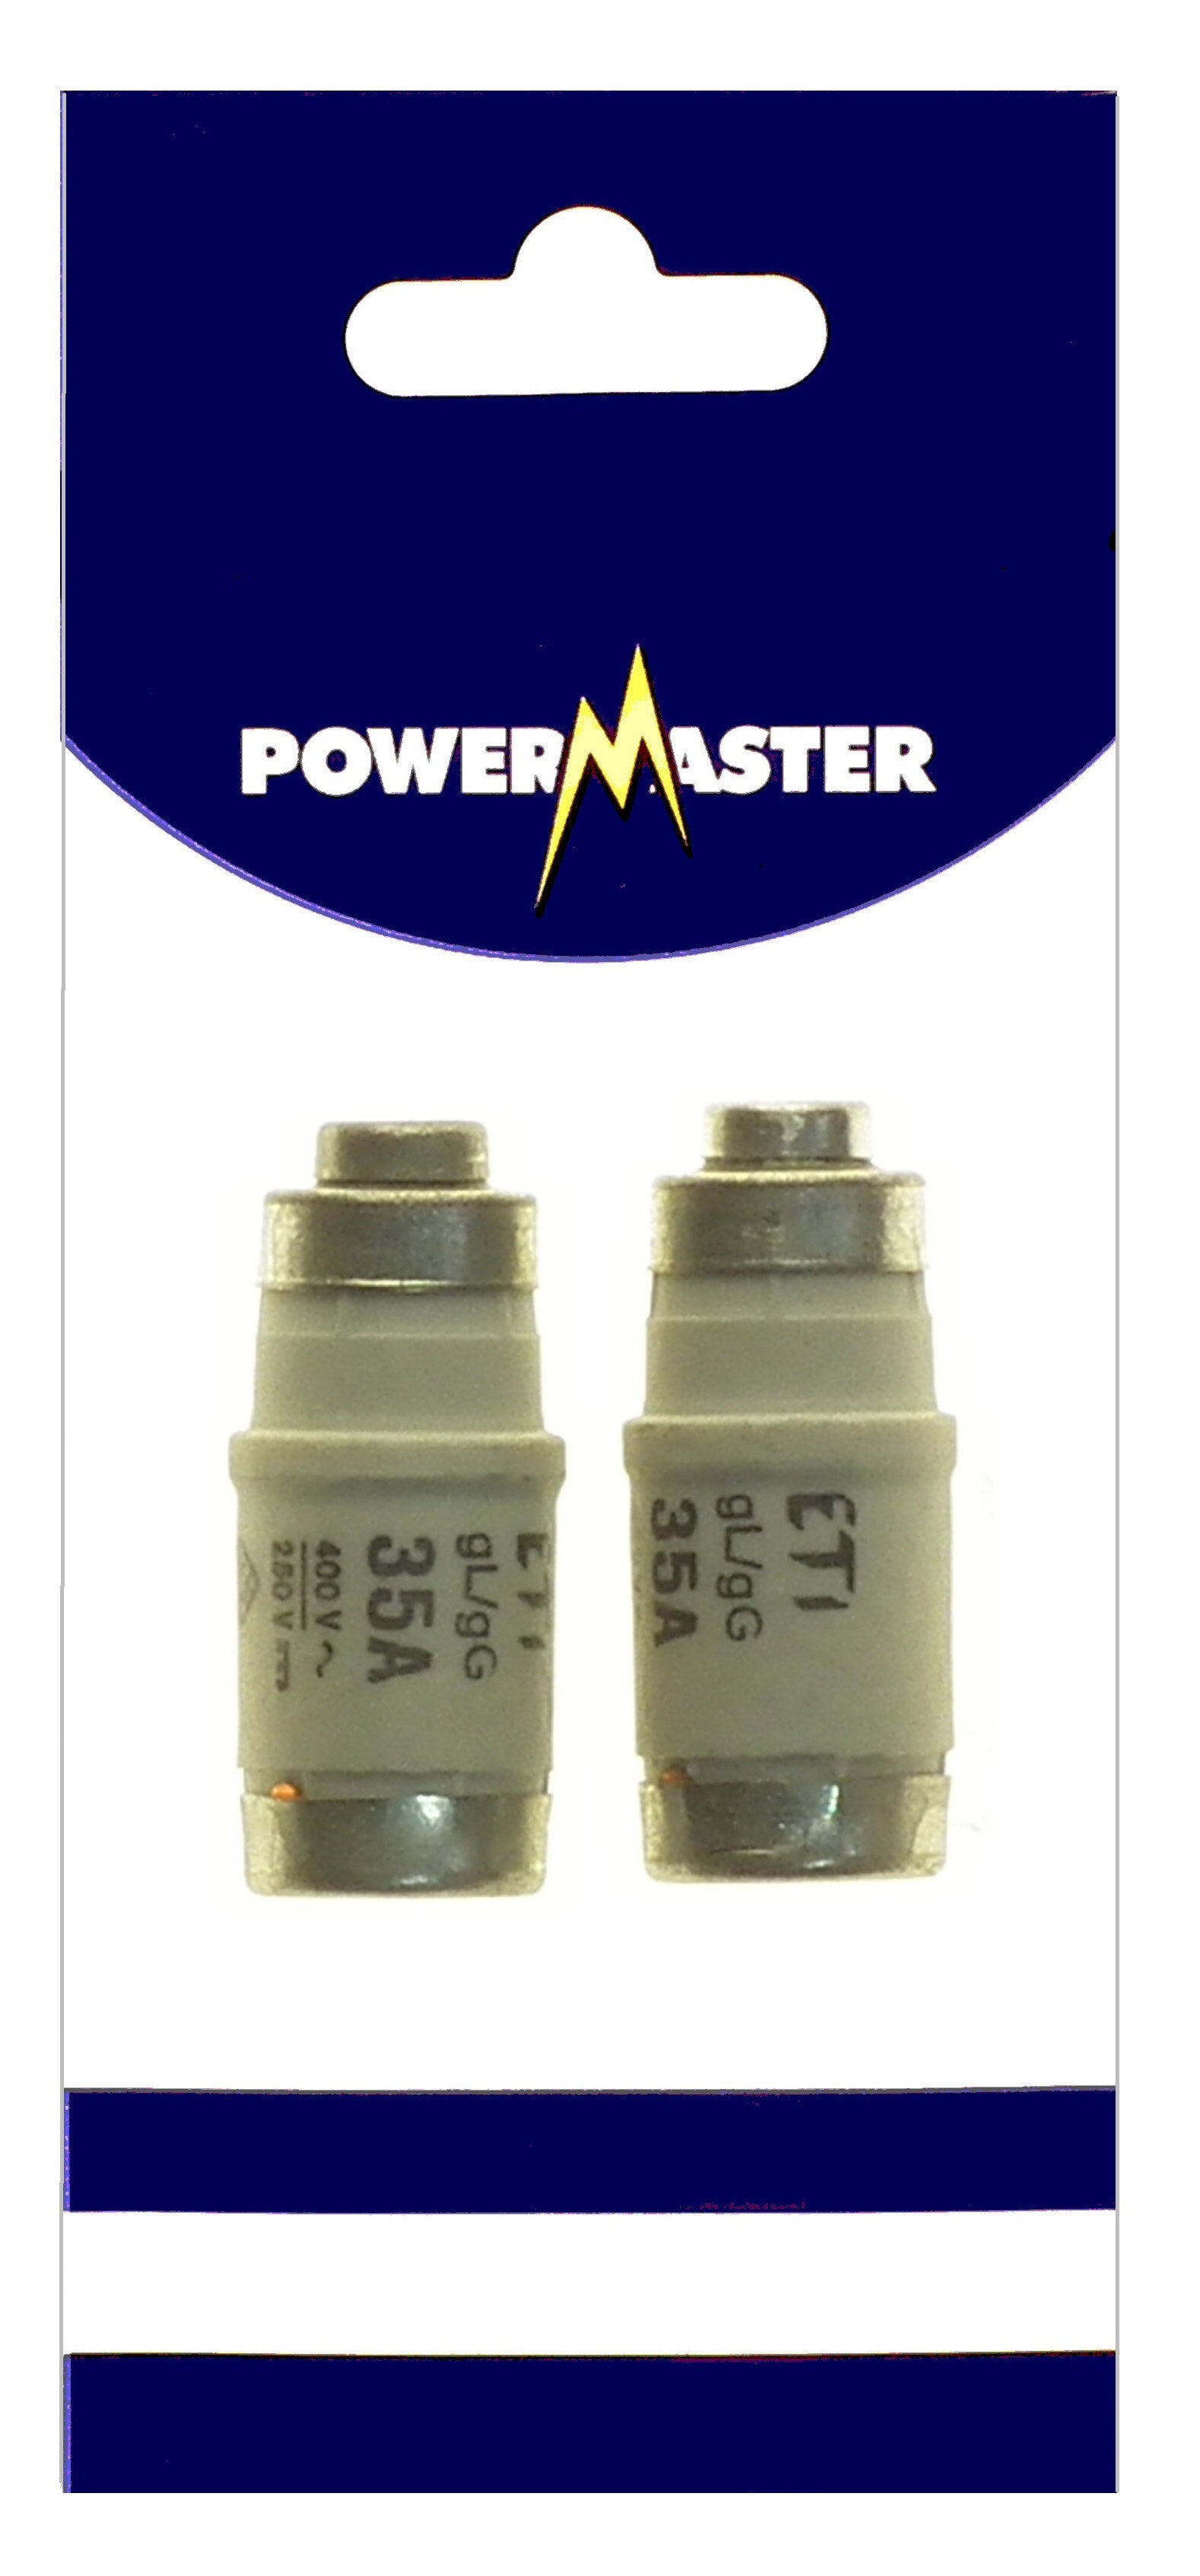 General Hardware | Fuses 35 Amp DZ (2pk) by Weirs of Baggot St